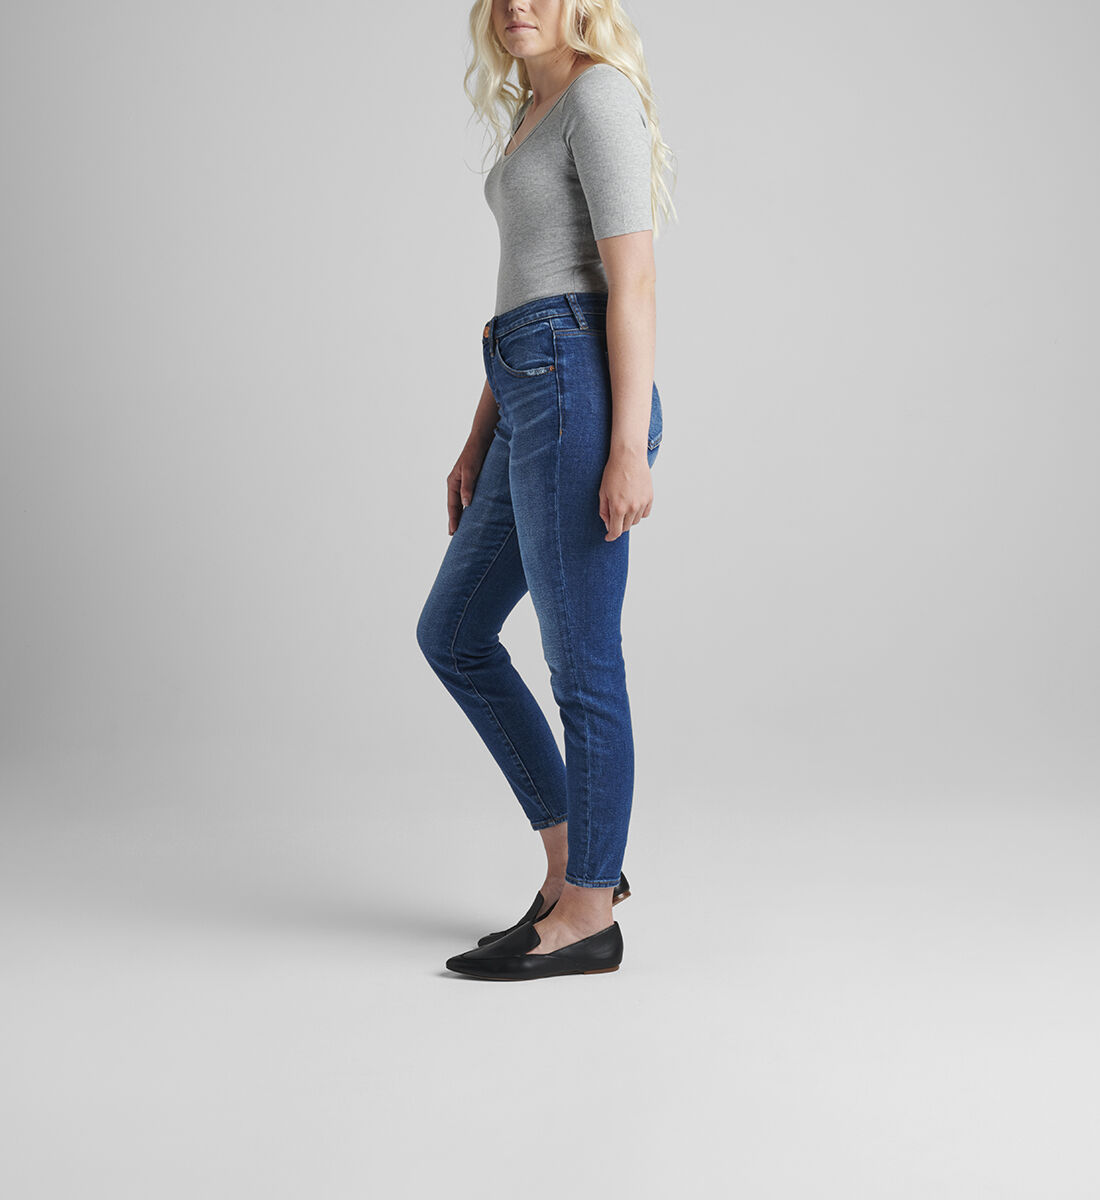 Cecilia Mid Rise Skinny Jeans Side